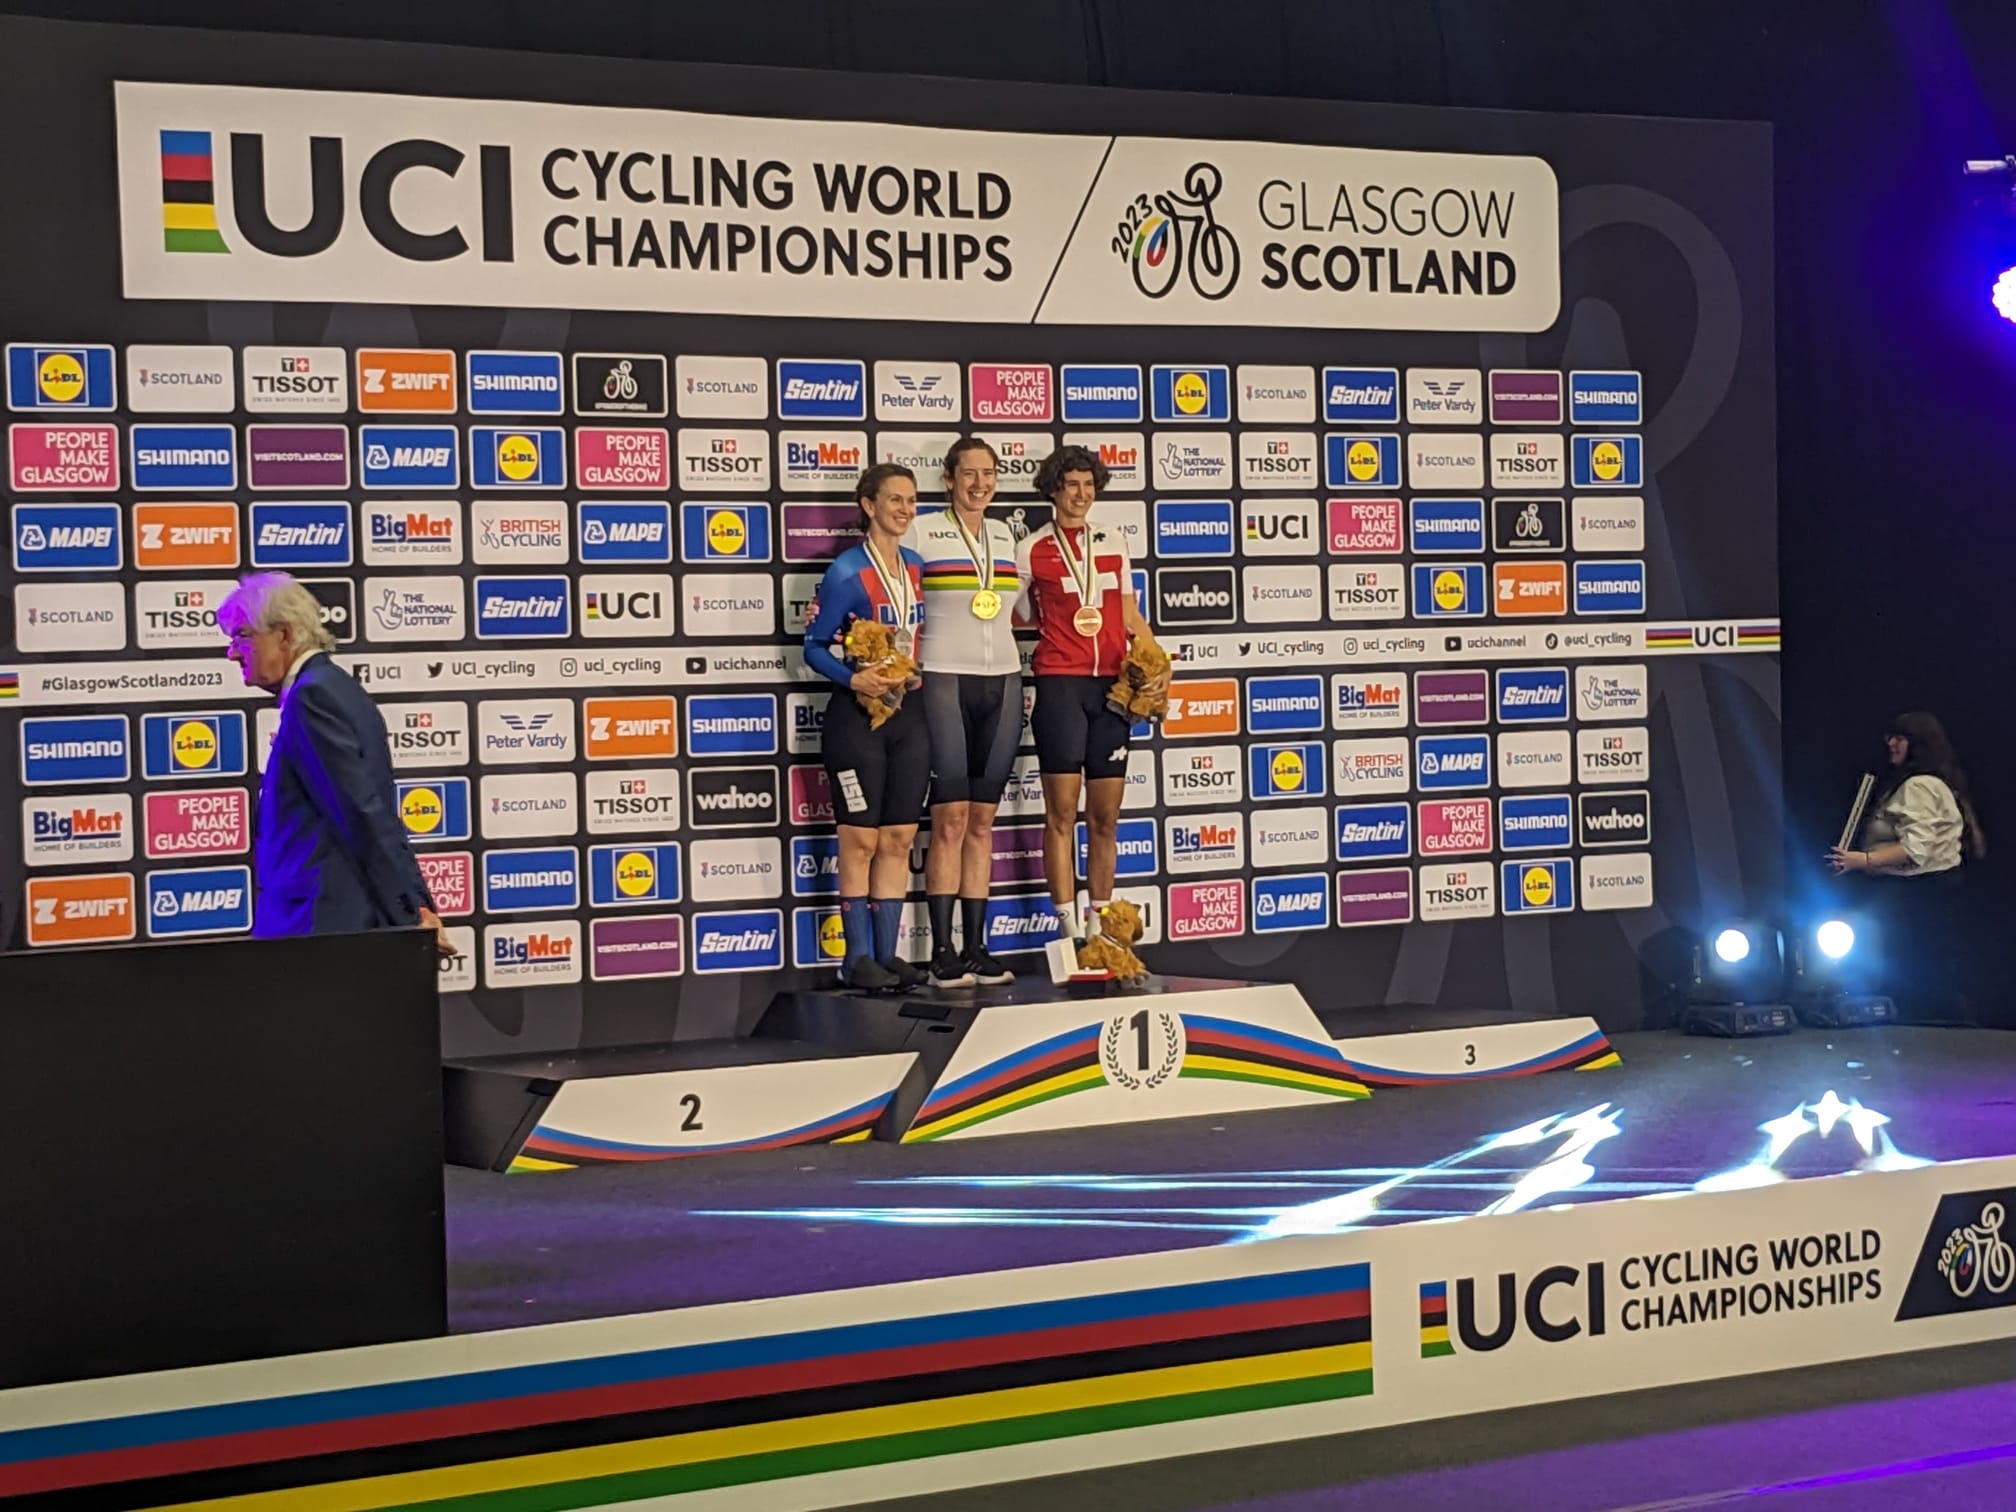 Anna with arms around other medallists on podium wearing rainbows